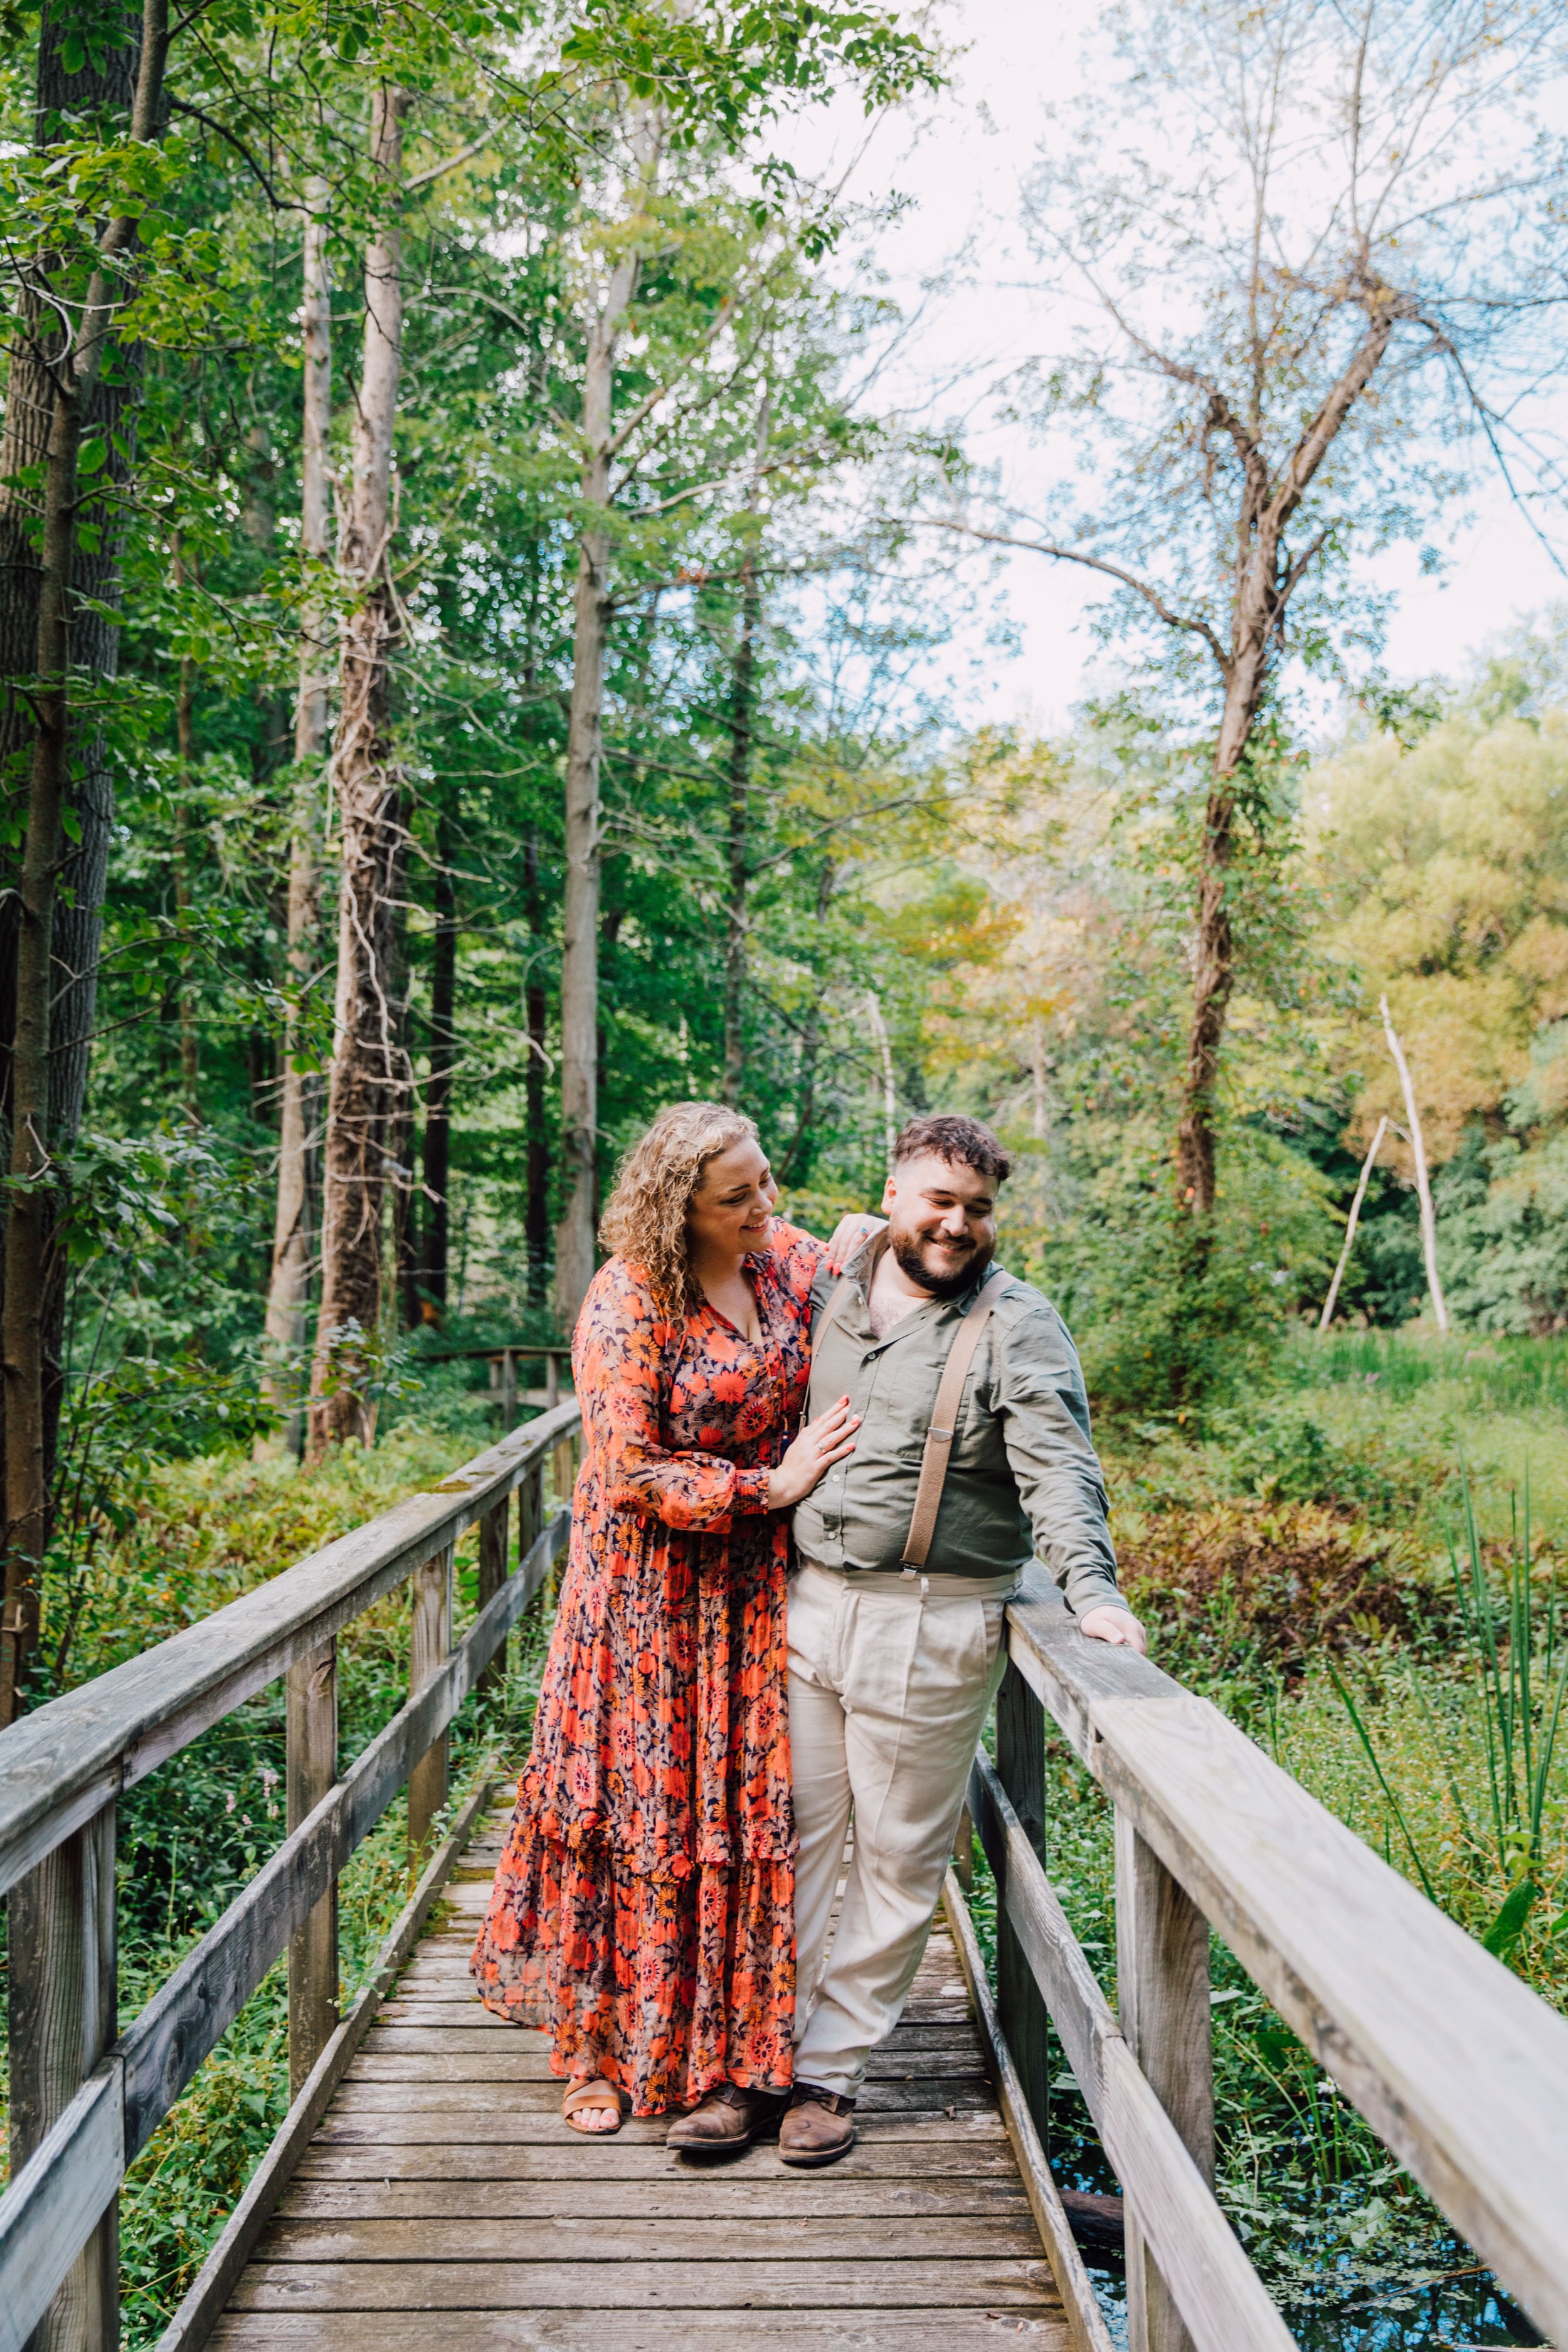  katie wraps her arms around her fiancee as they take engagement photos in the woods on a wooden bridge over a creek 